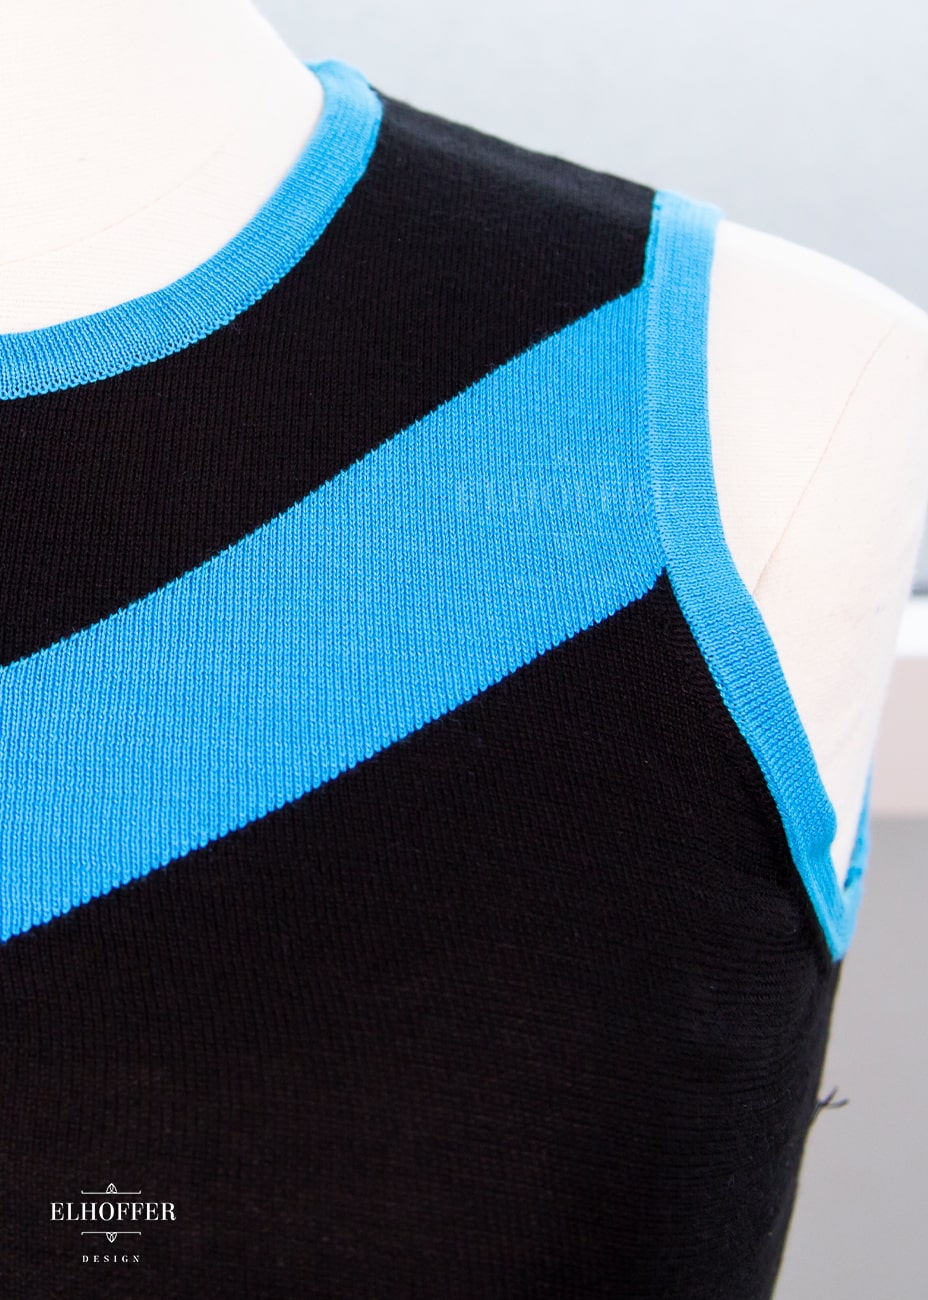 Close up of the shoulder of the tank top on a mannequin.  Showcasing the lightweight knit texture and the black and teal colors of the top.